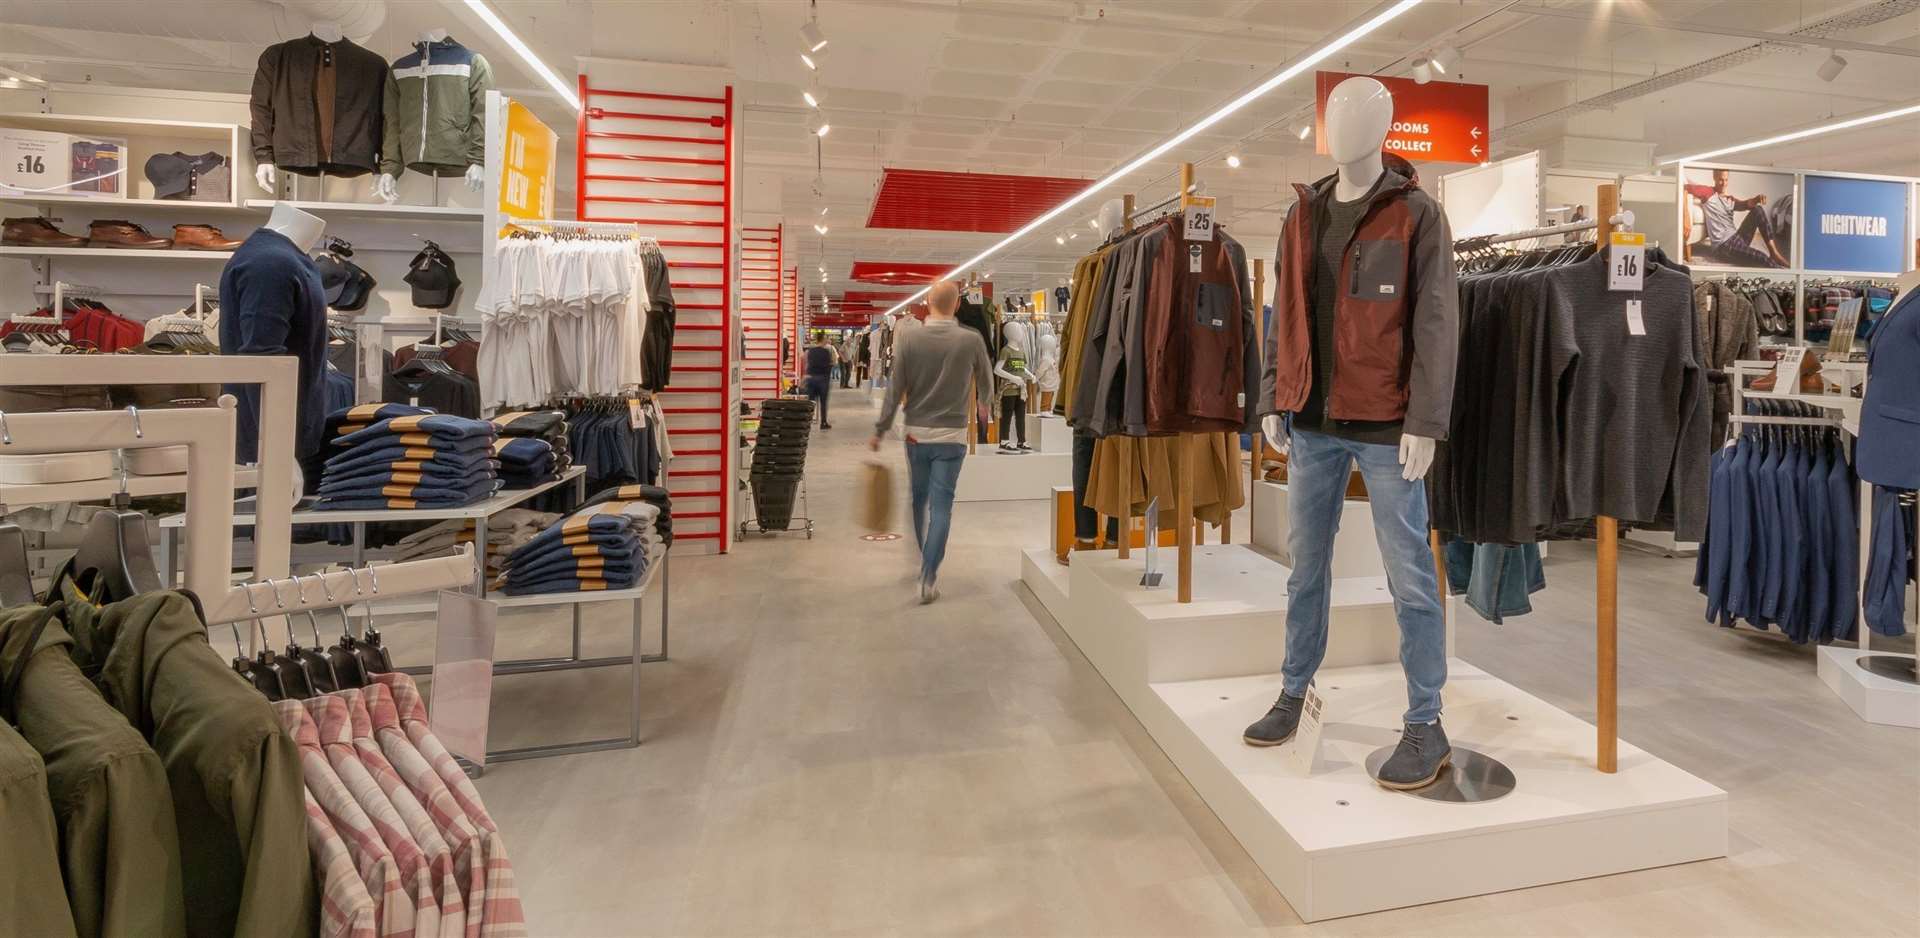 Inside the new Matalan store at the The Mall shopping centre in Maidstone